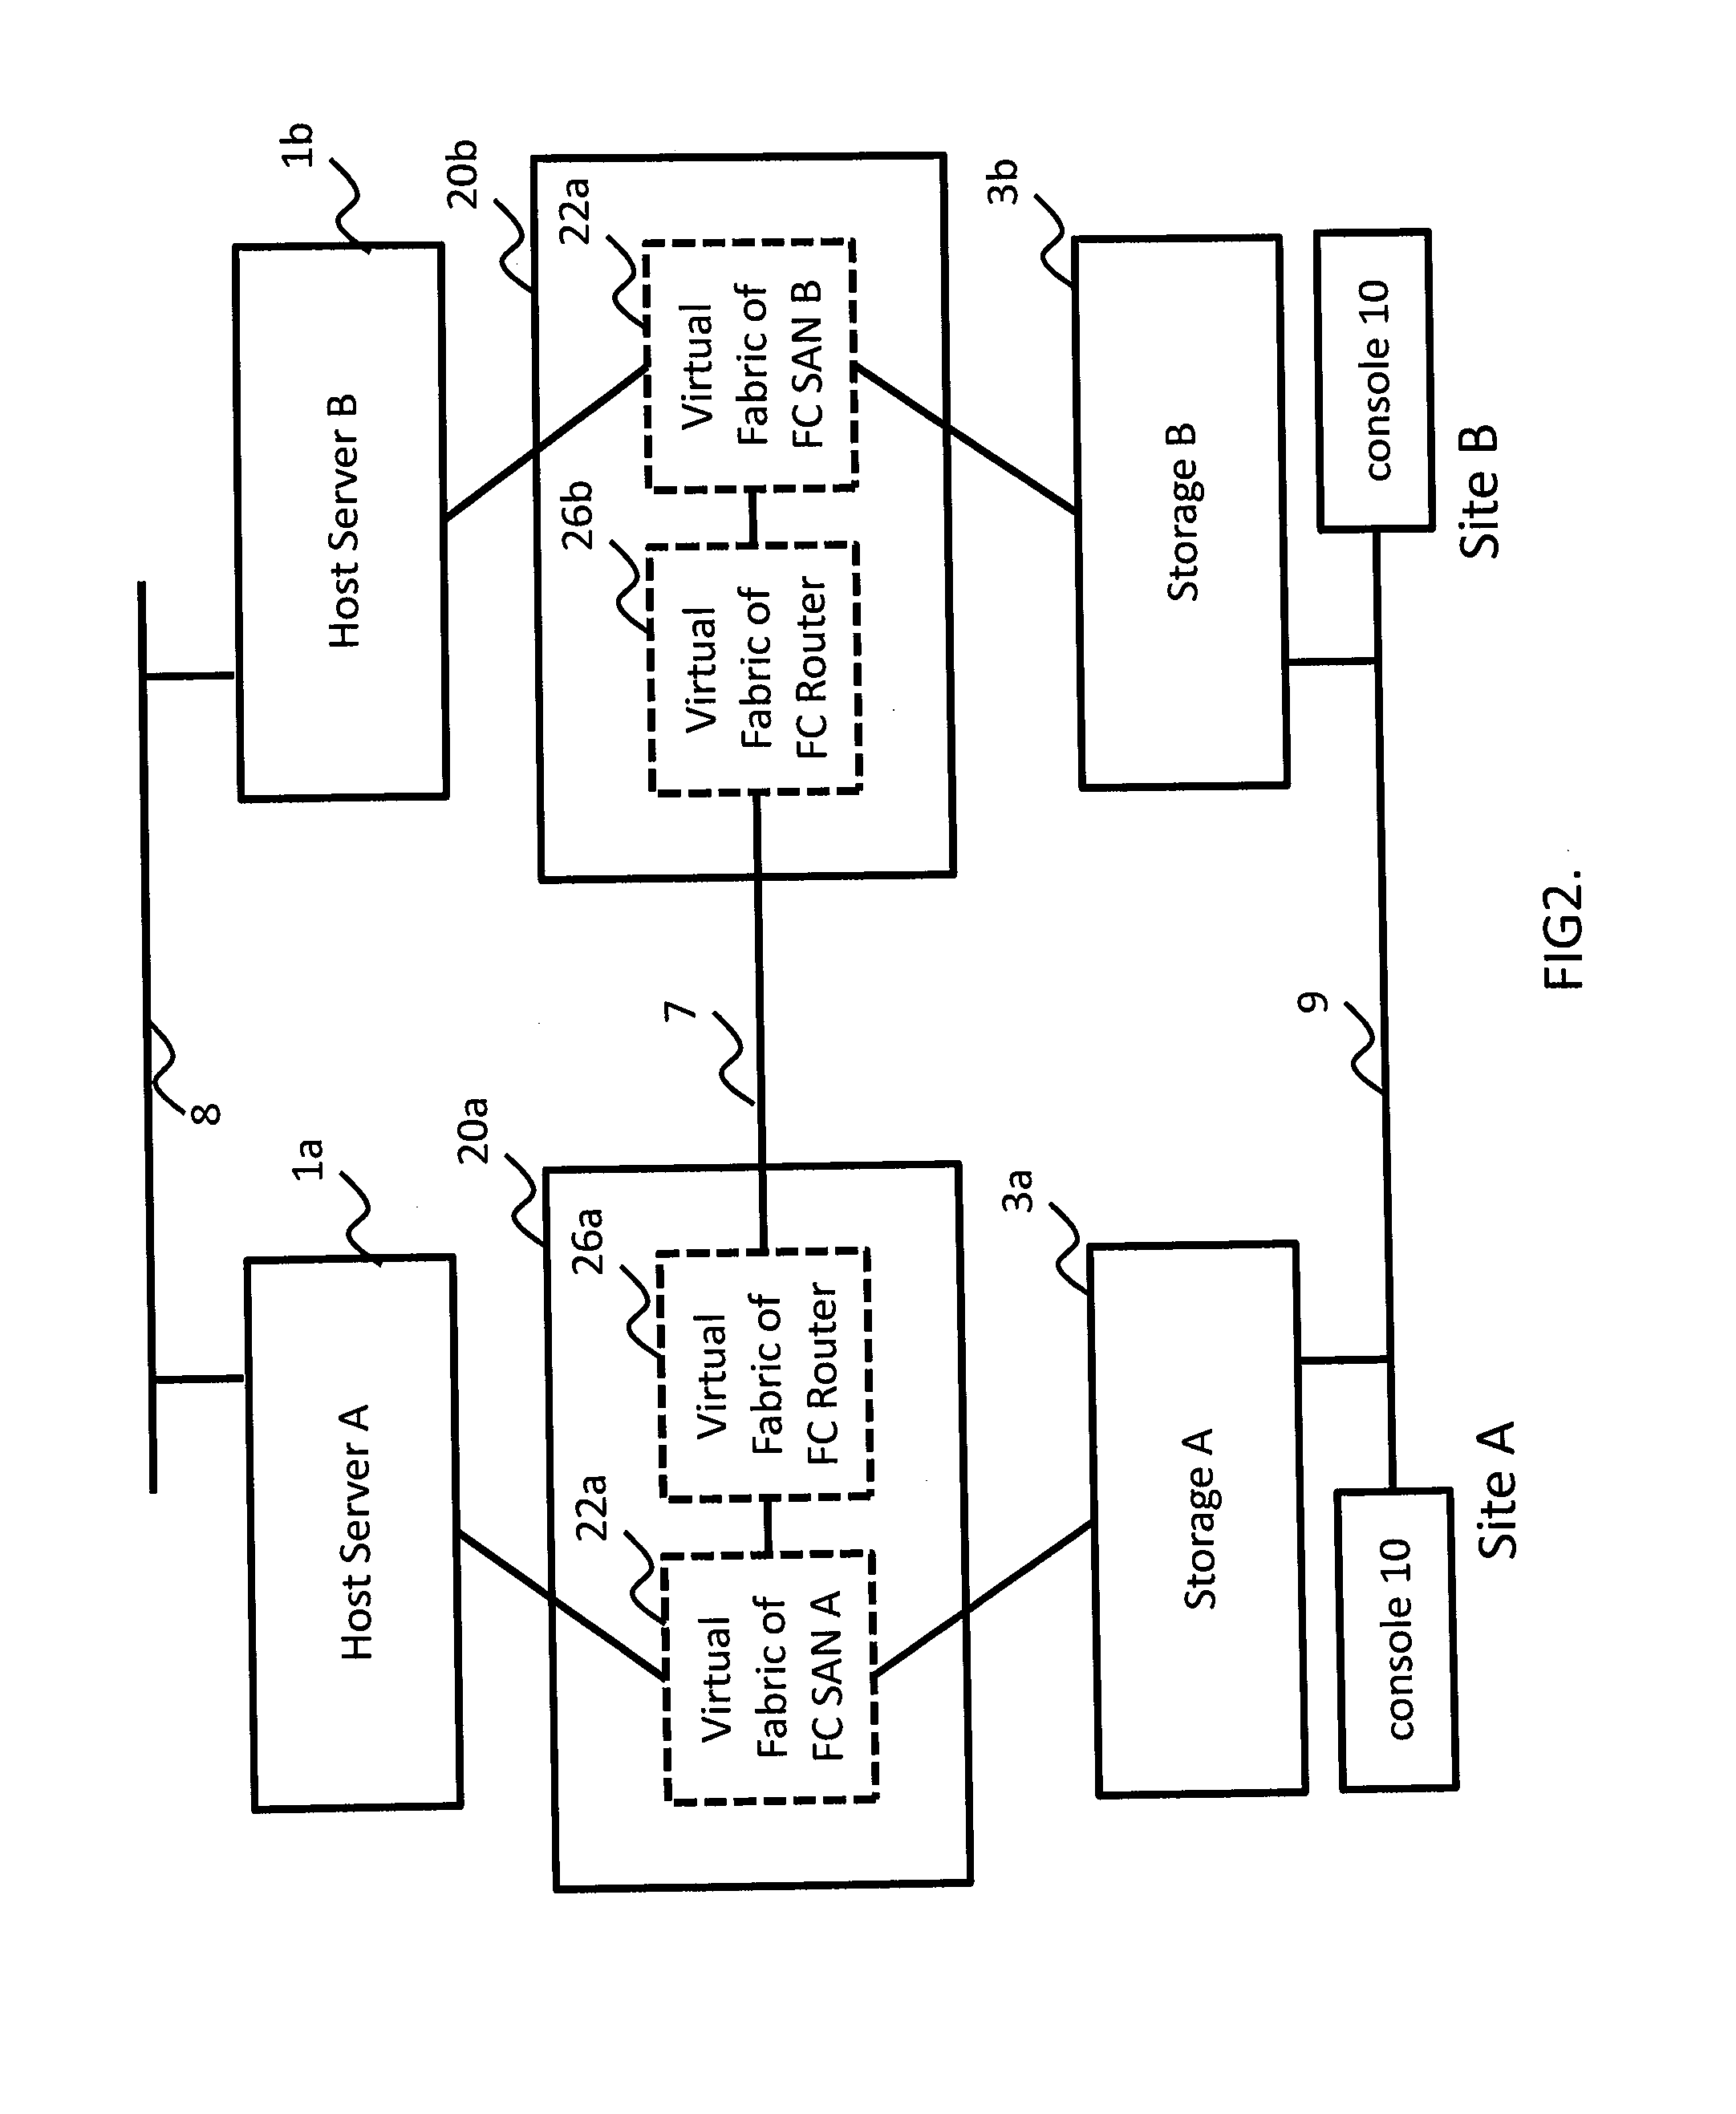 Method and apparatus of network configuration for storage federation